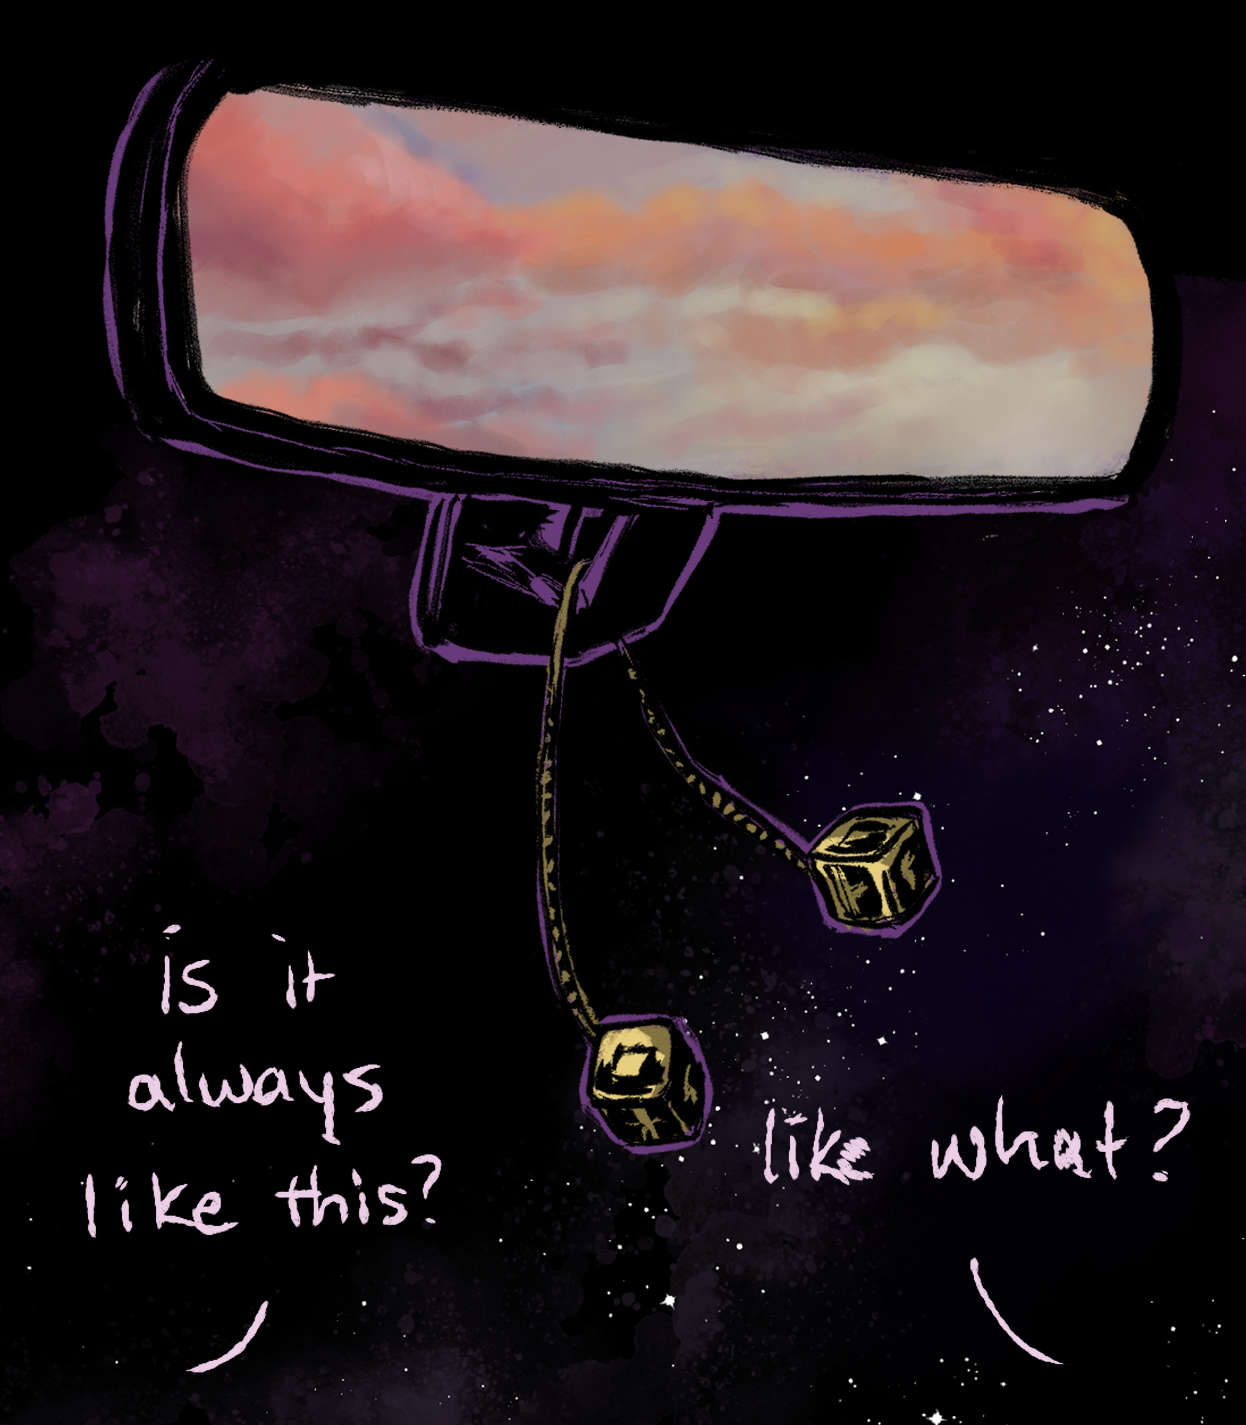 Closeup of the rearview mirror, which reflects a pastel sky. Han's dice swing from it. Rey's voice asks: "Is it always like this?" Ben answers: "Like what?"